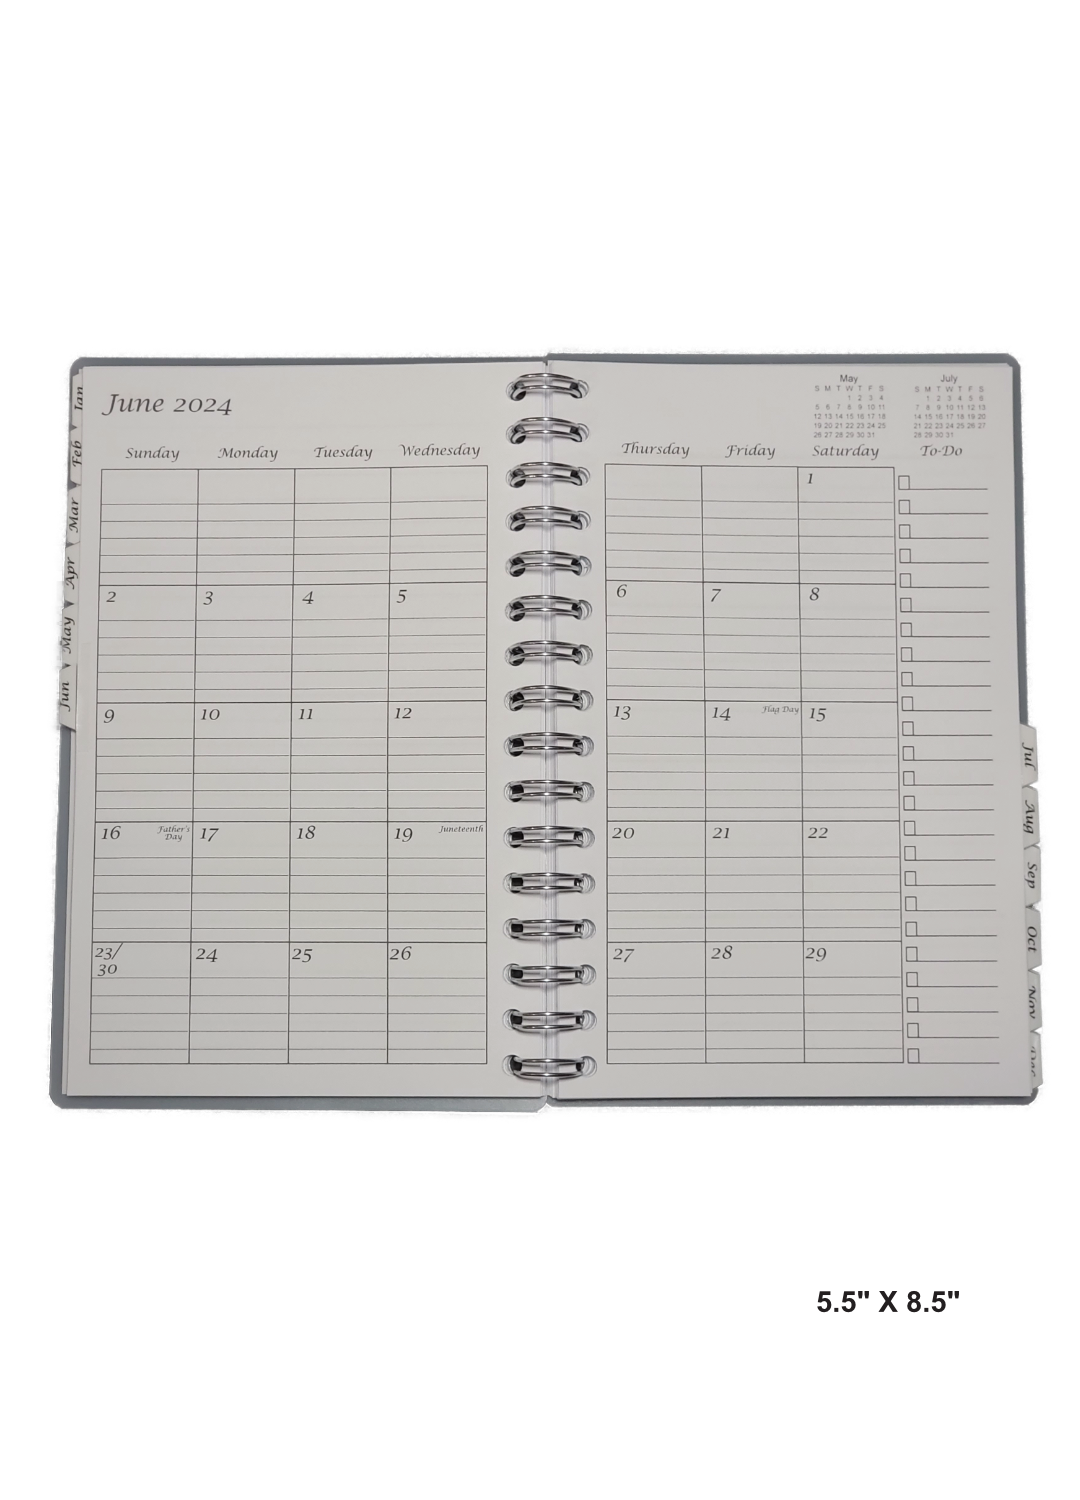 Inside view of a 5.5" x 8.5" hand-made 12 month planner with a clean and organized layout. Each month has dedicated pages with ample writing space and clear heading. A practical and visually appealing tool for staying organized.